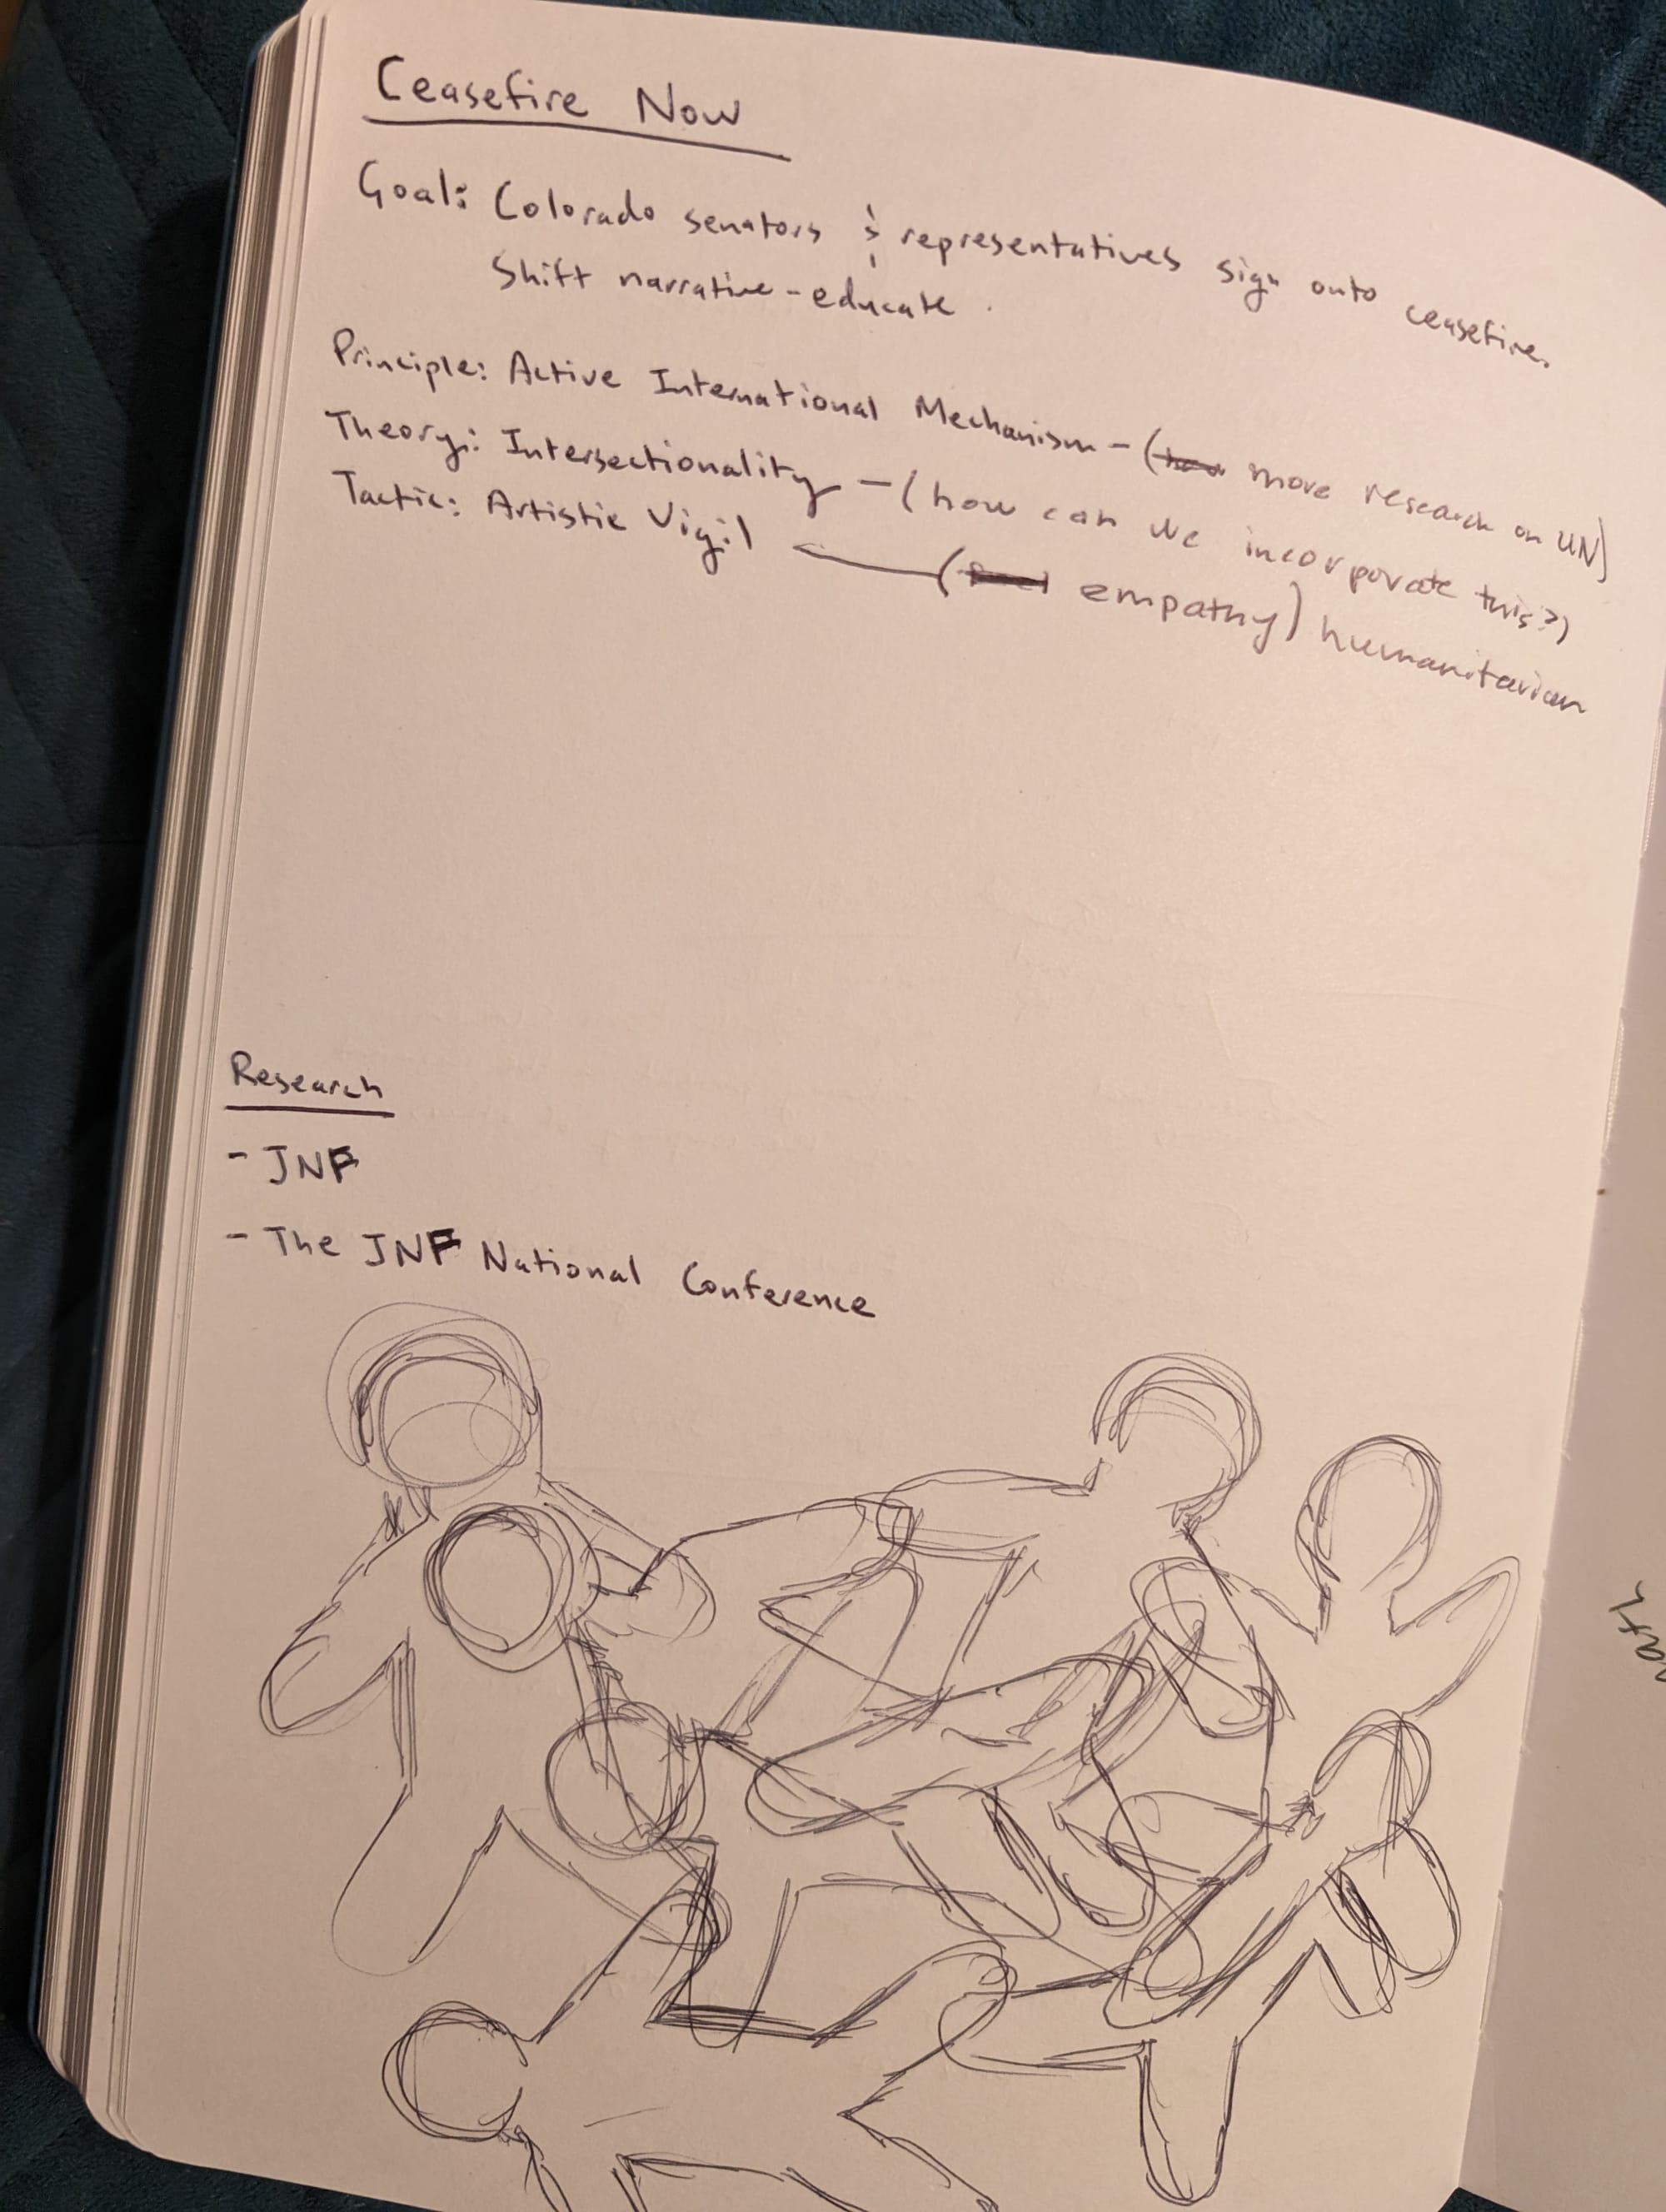 Notes from our design an action game, including a sketch of children's outlines overlapping one another.